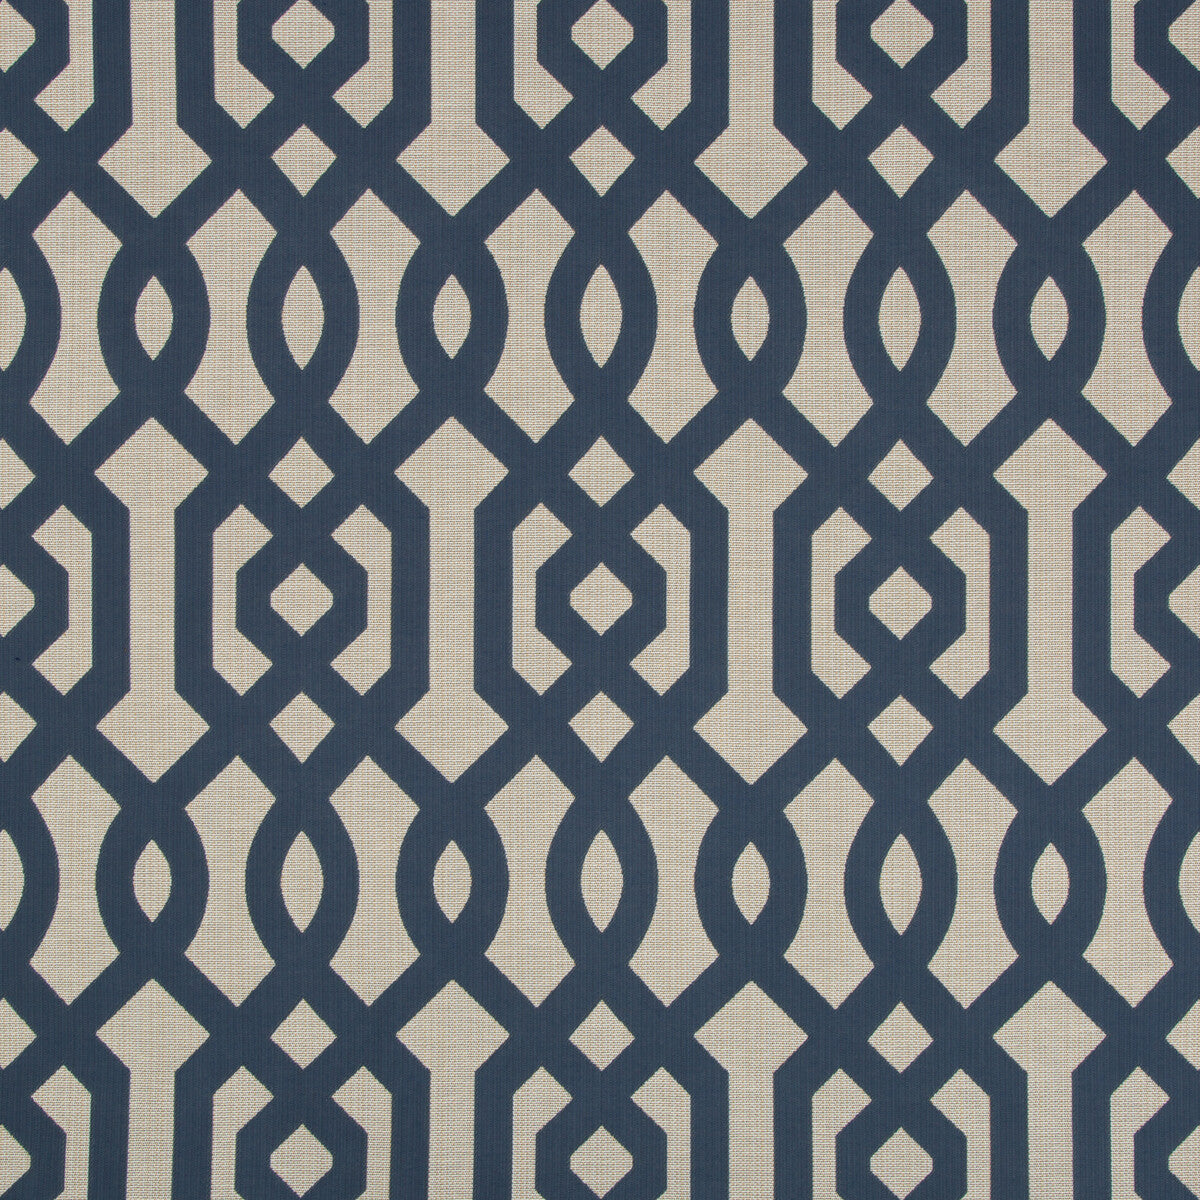 Kravet Design fabric in 34998-505 color - pattern 34998.505.0 - by Kravet Design in the Performance Crypton Home collection